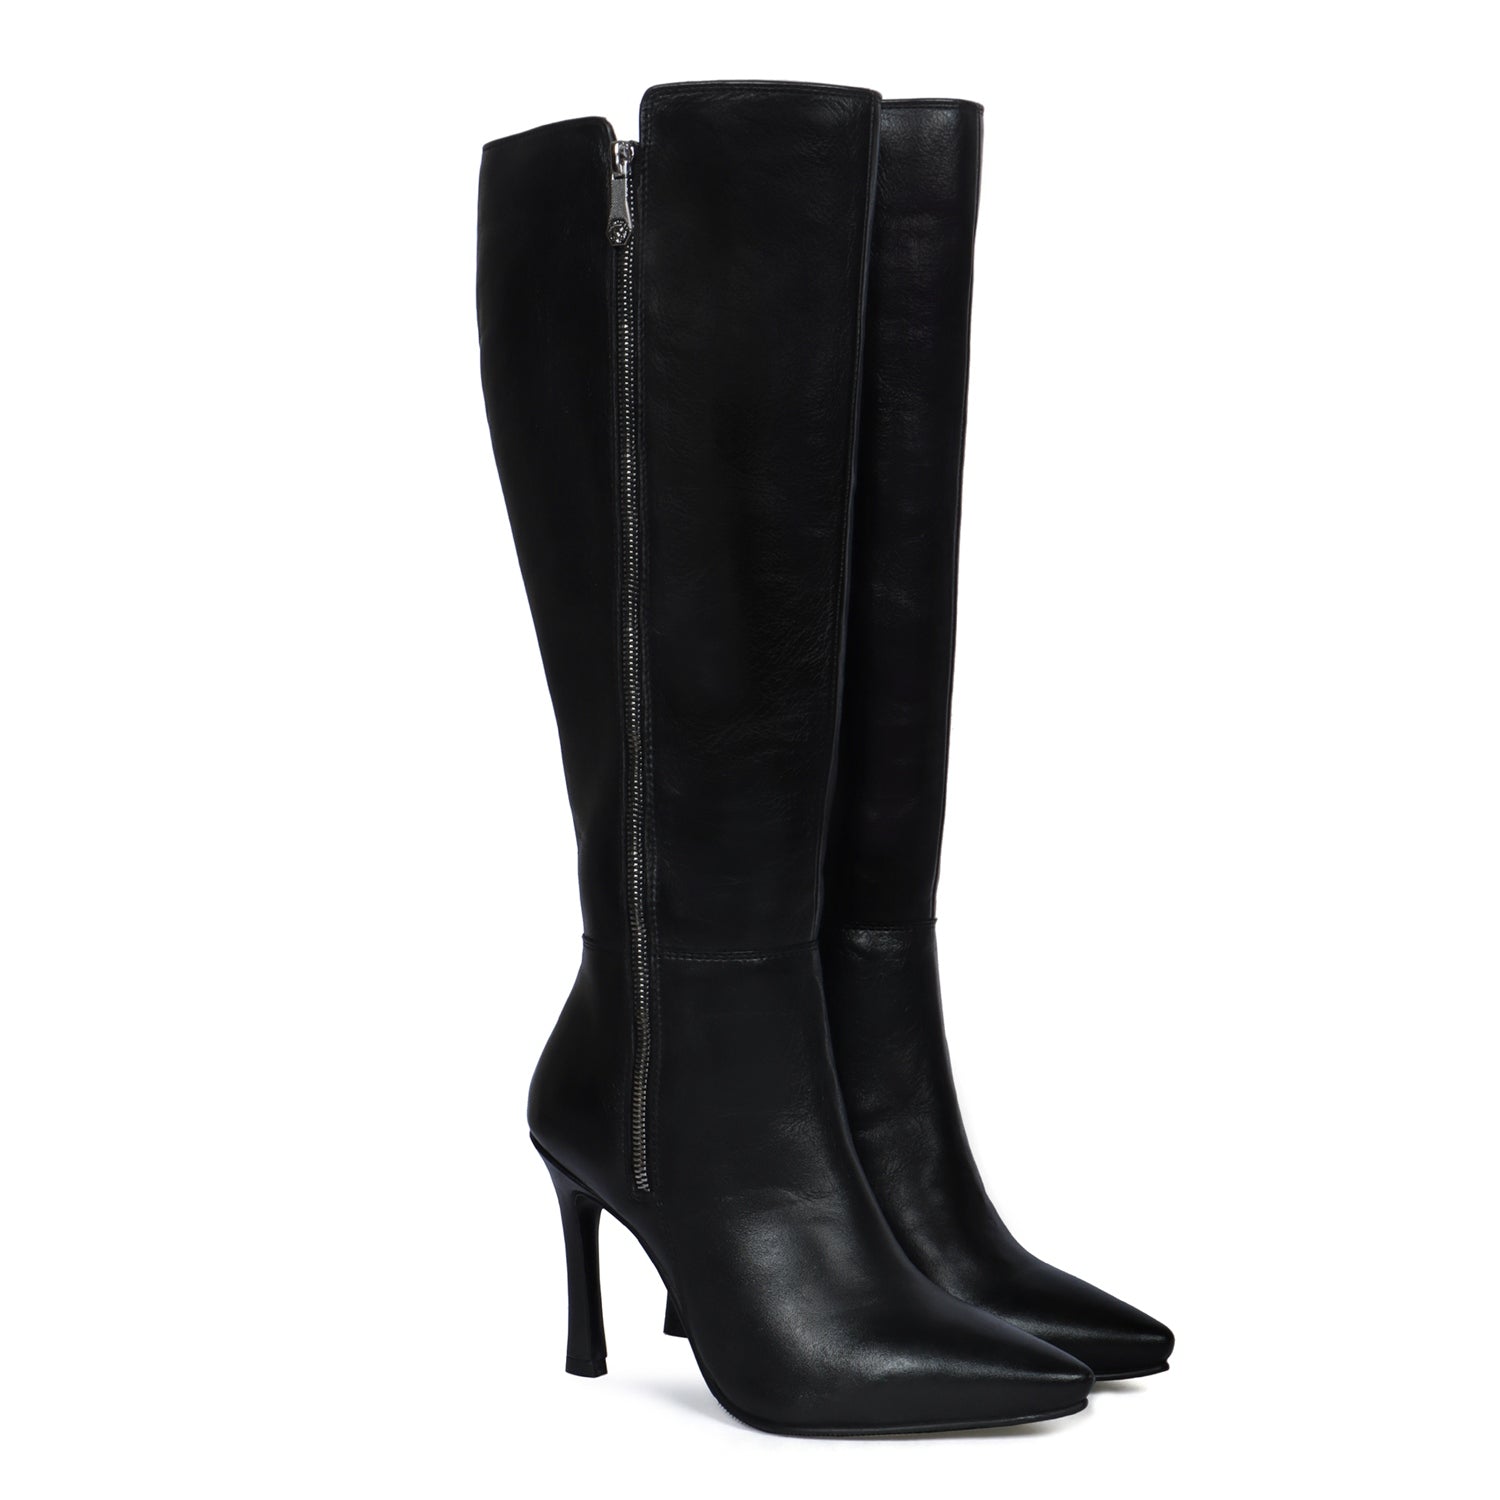 Sergio Rossi Kim ankle-length Boots - Farfetch